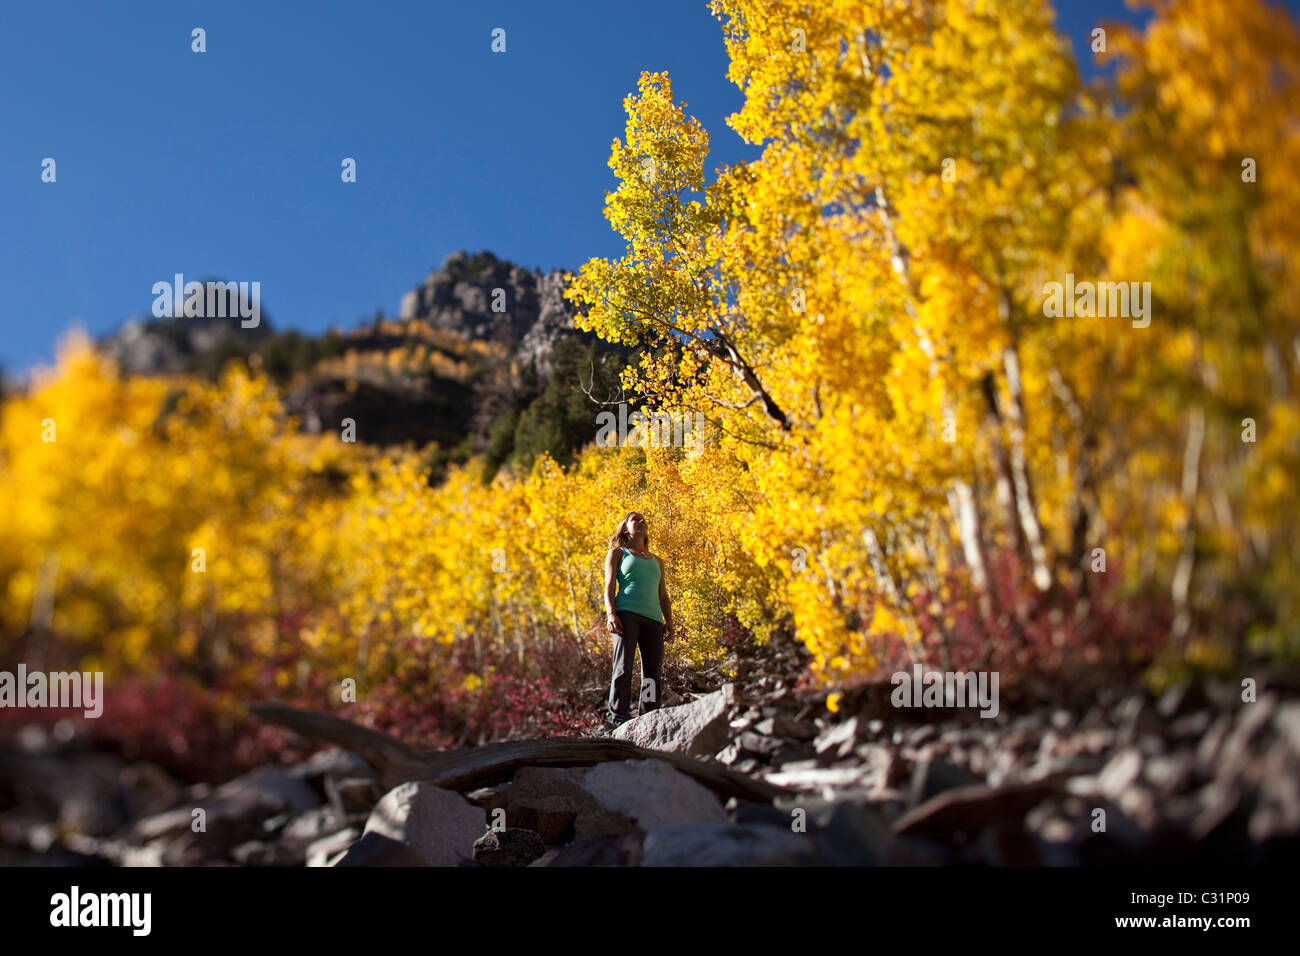 A young woman hiking stops to enjoy the amazing fall colors in Colorado. Stock Photo